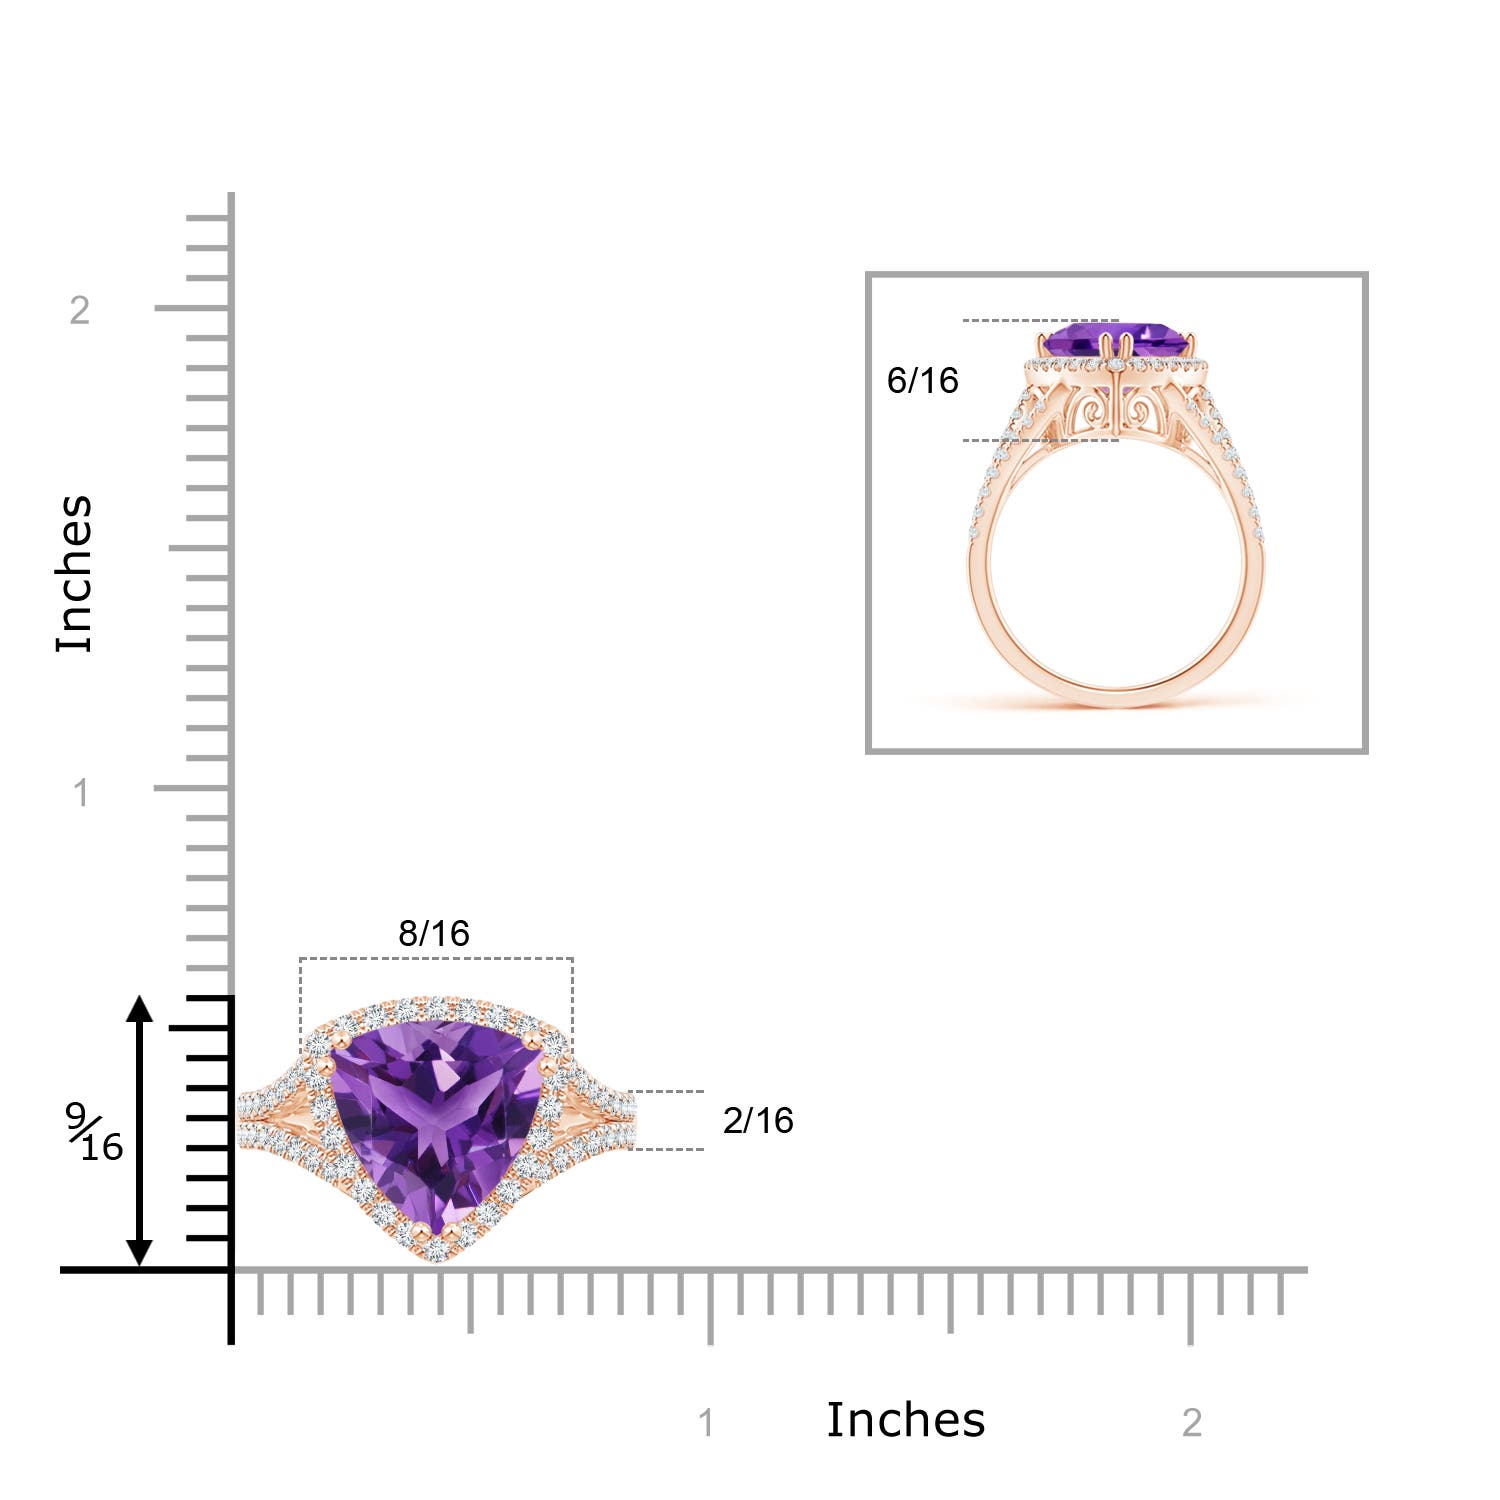 AAA - Amethyst / 3.16 CT / 14 KT Rose Gold